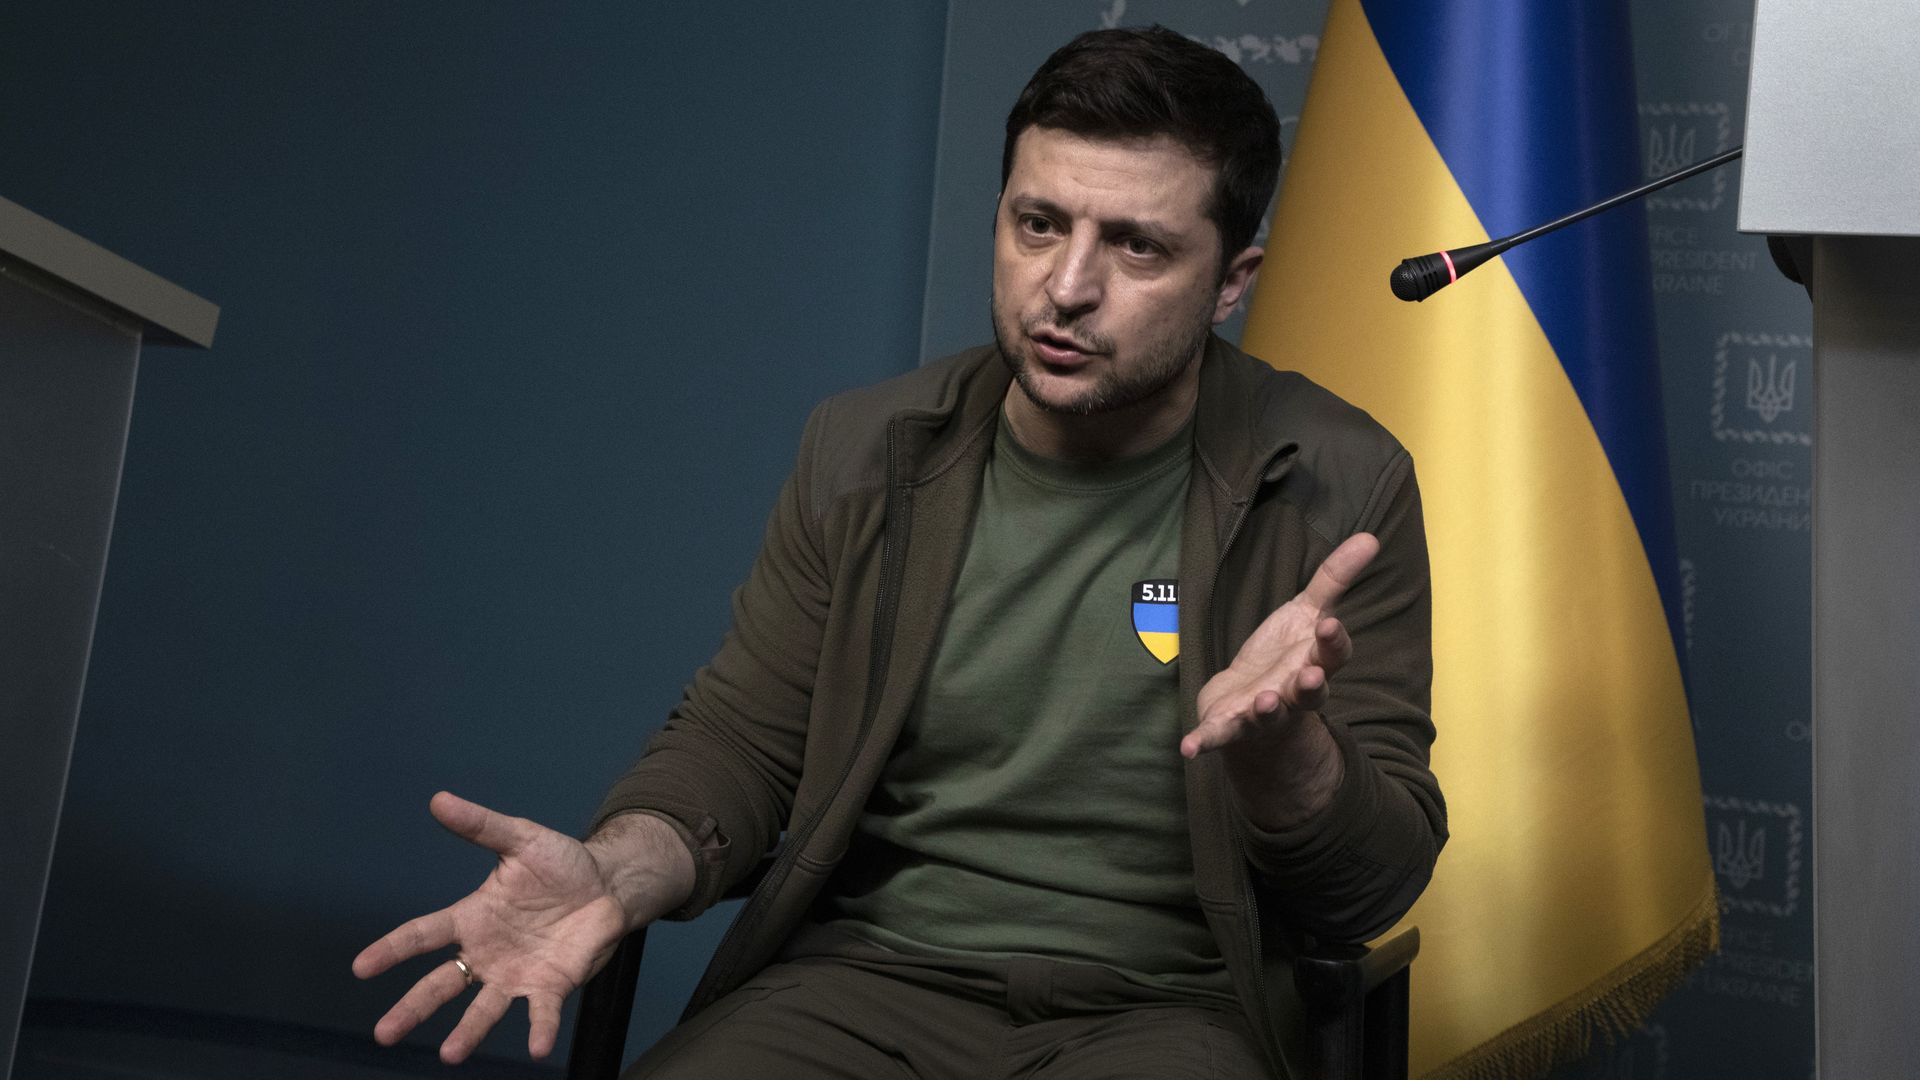  Ukrainian President Volodymyr Zelensky speaks at a press conference at his official residence the Maryinsky Palace on March 3,2022 in Kyiv, Ukraine. 